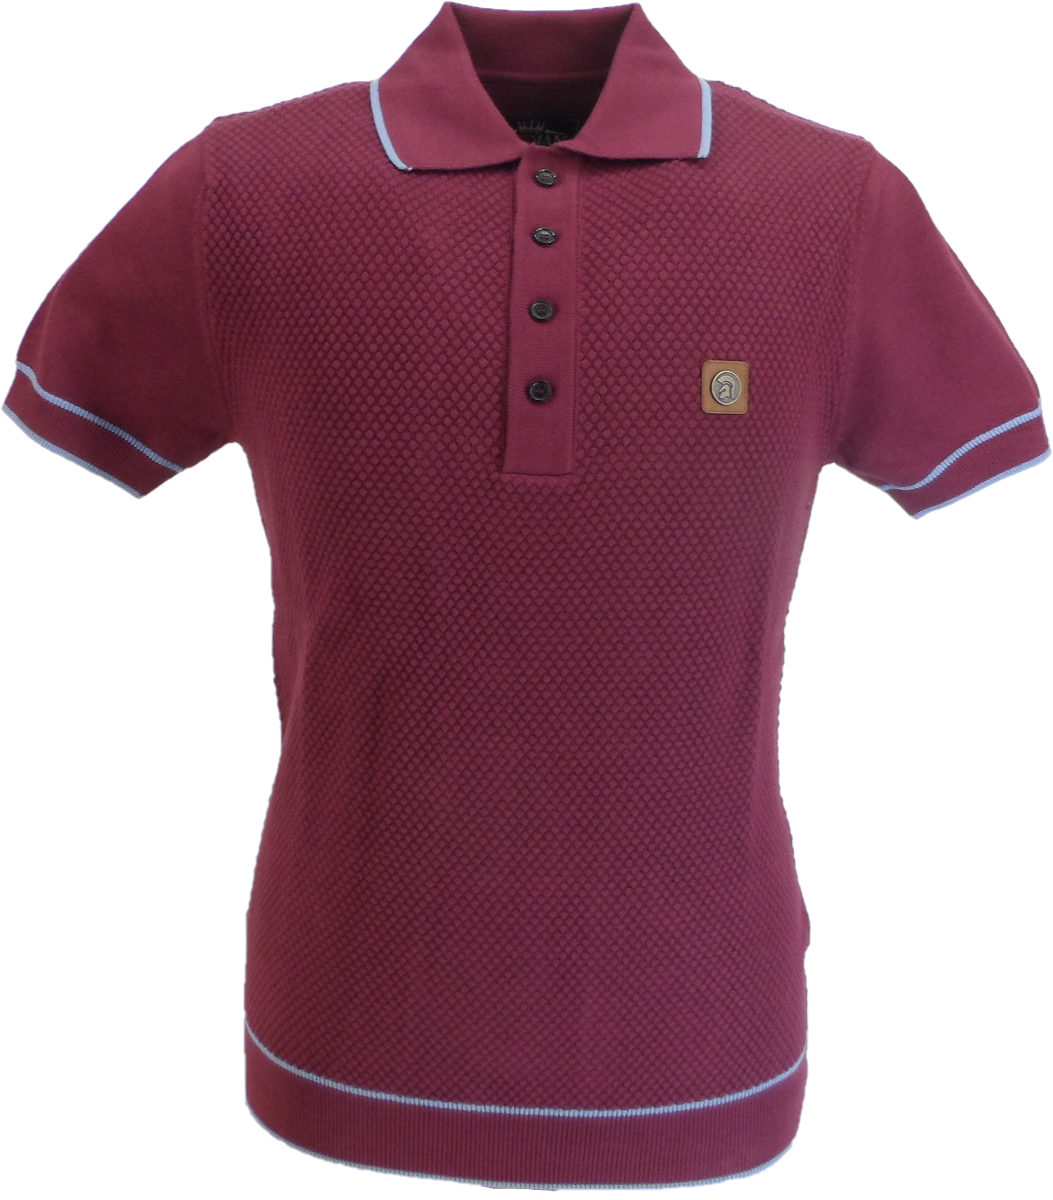 Trojan Records Mens Port Red Textured Knitted Polo Shirt